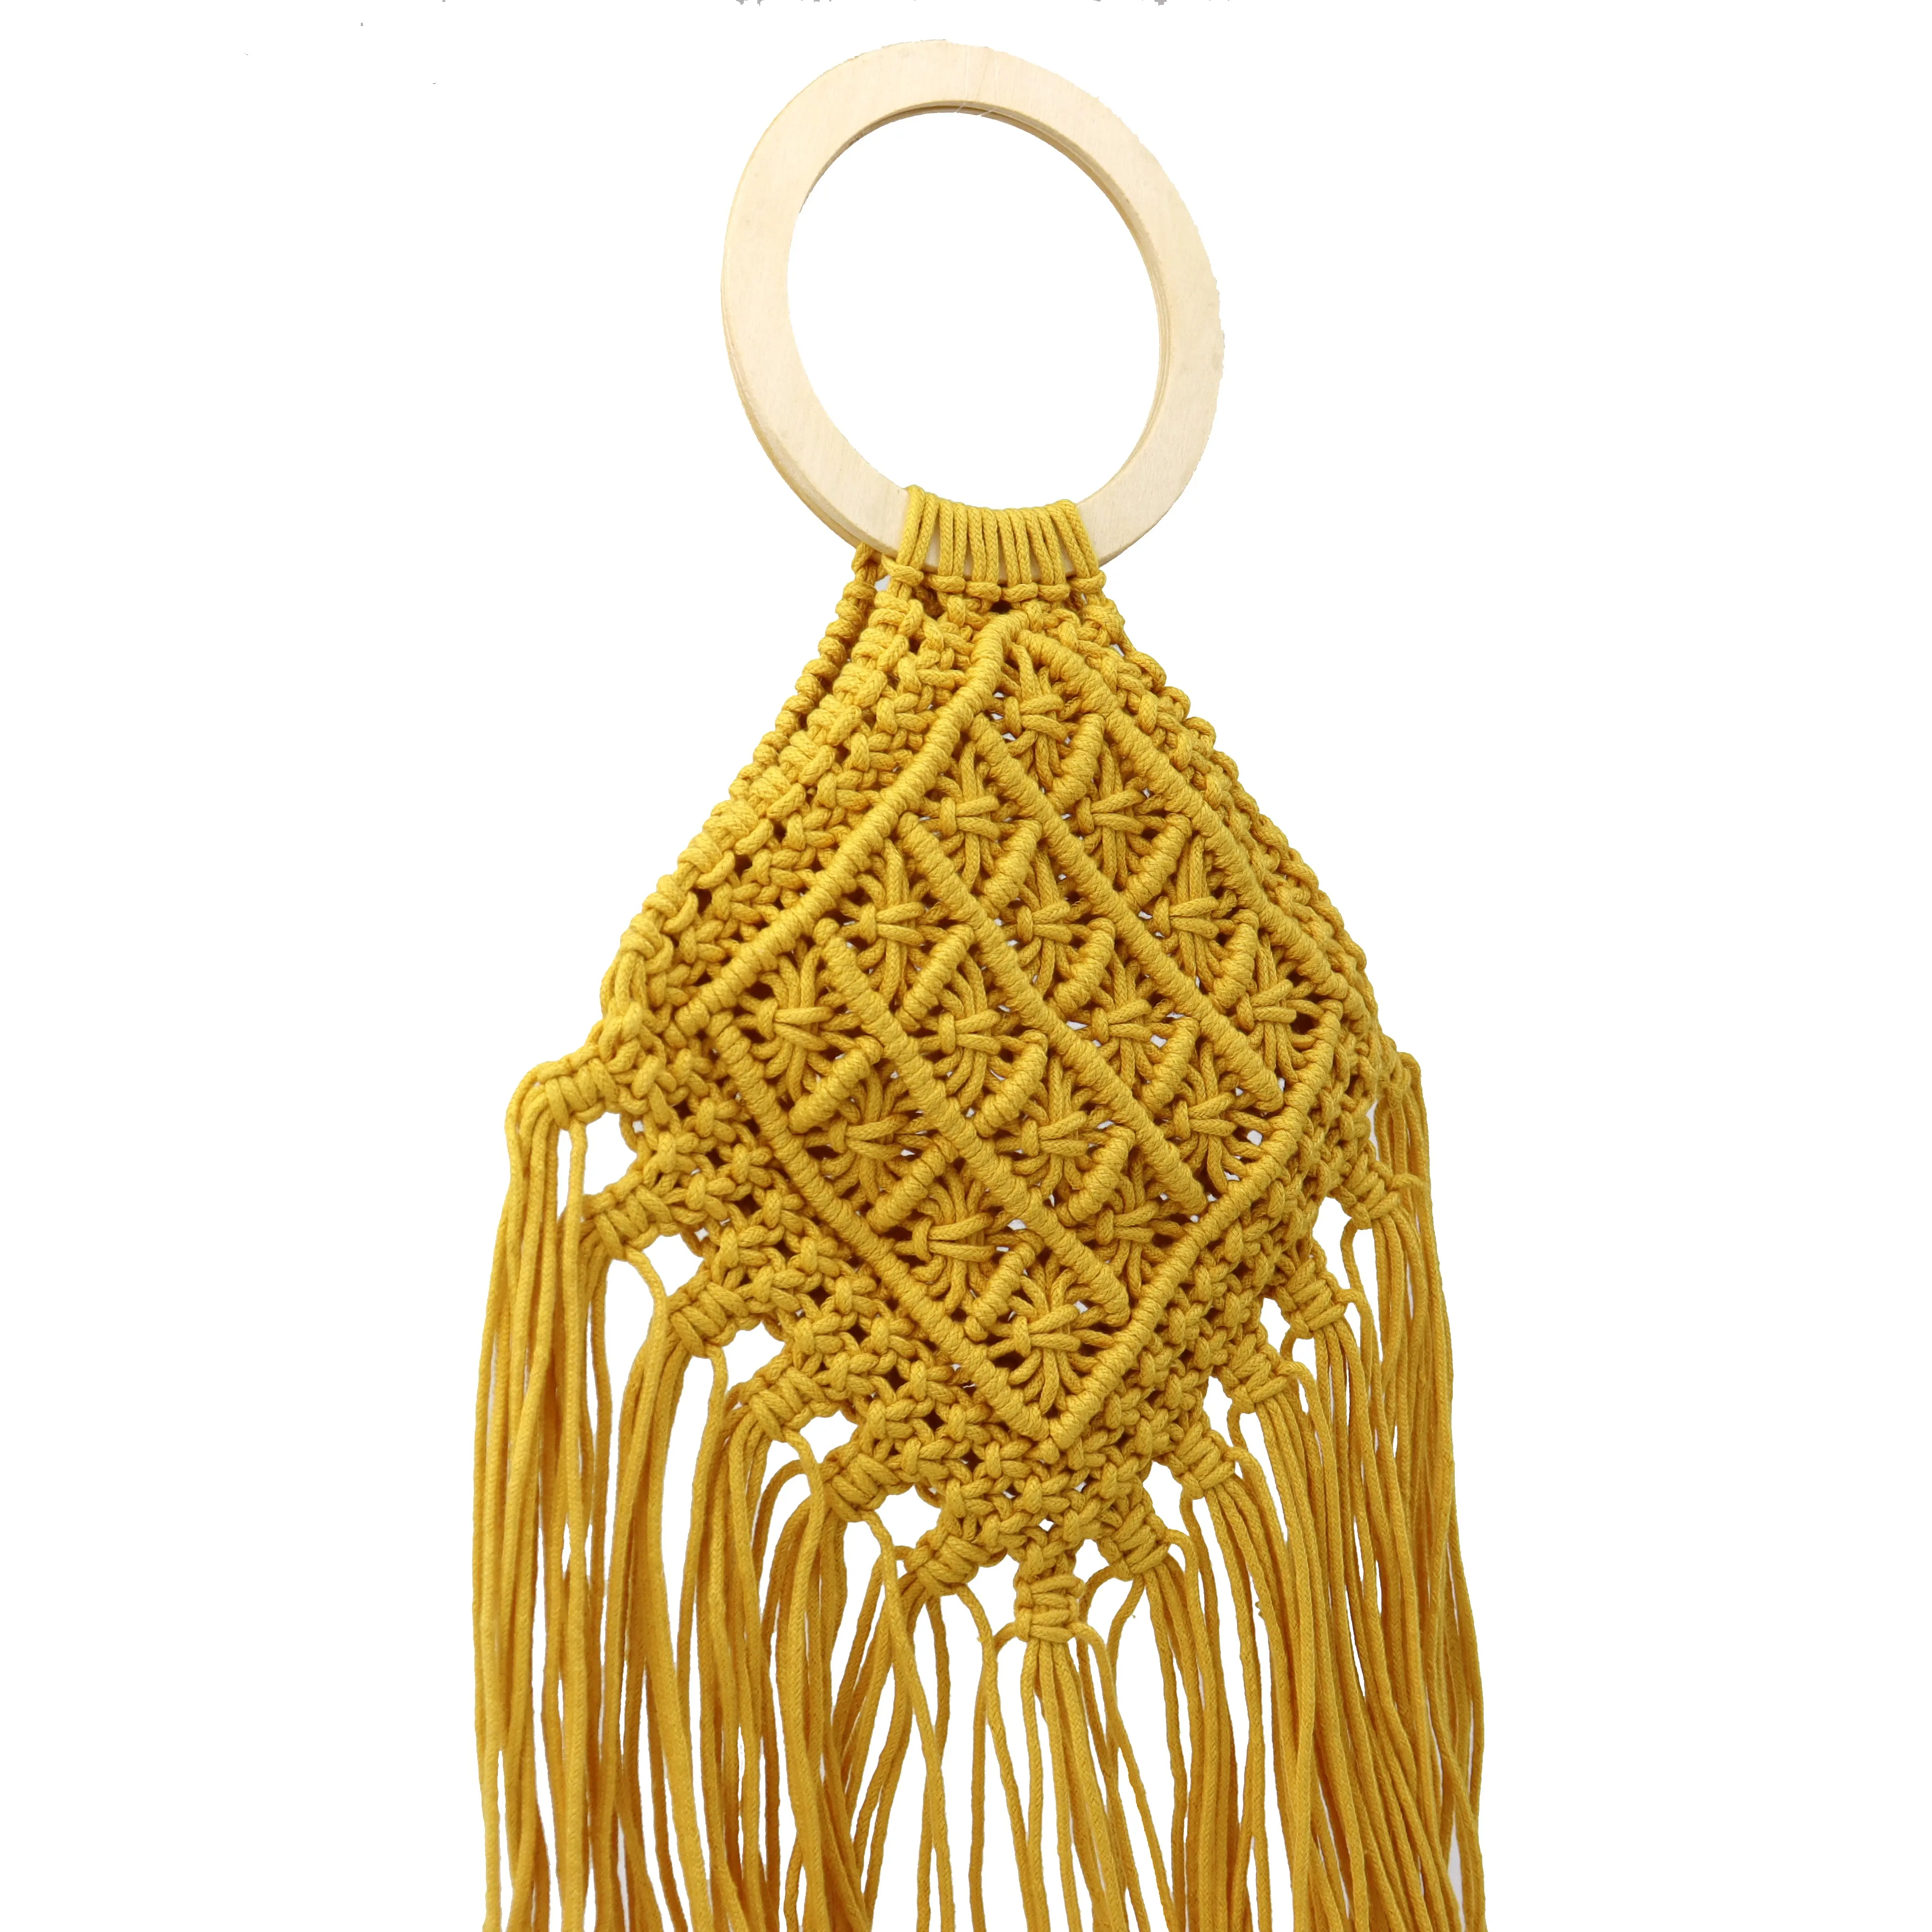 Wholesale Chinese style yellow crochet hand made hand bag with wooden handles